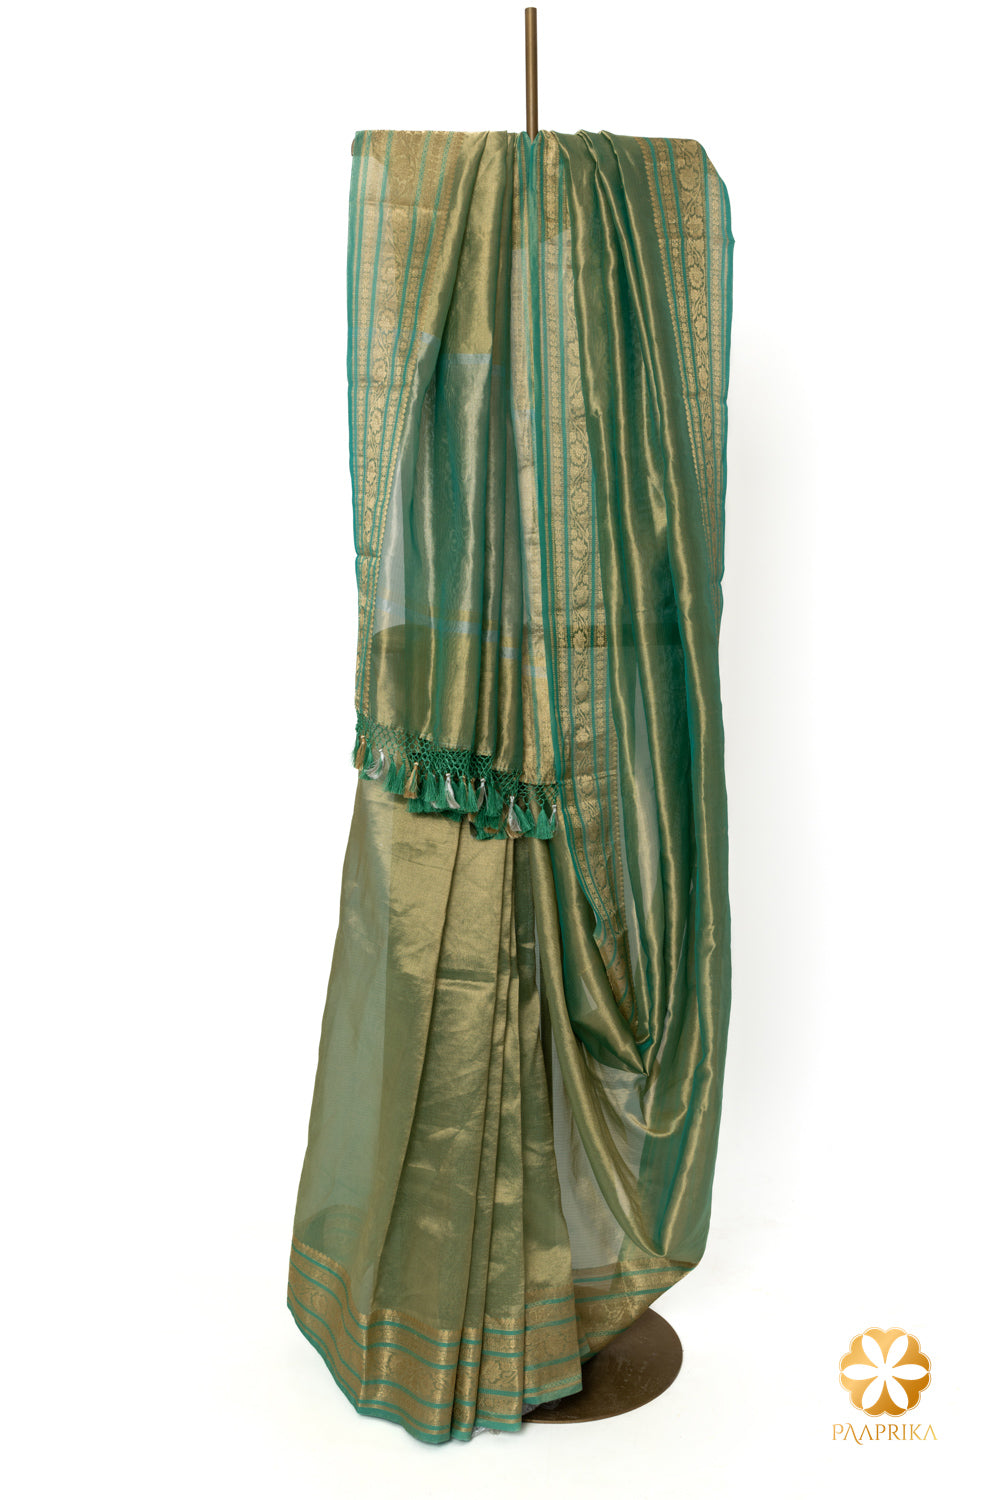 Close-up of the opulent golden woven temple border on the turquoise blue saree.